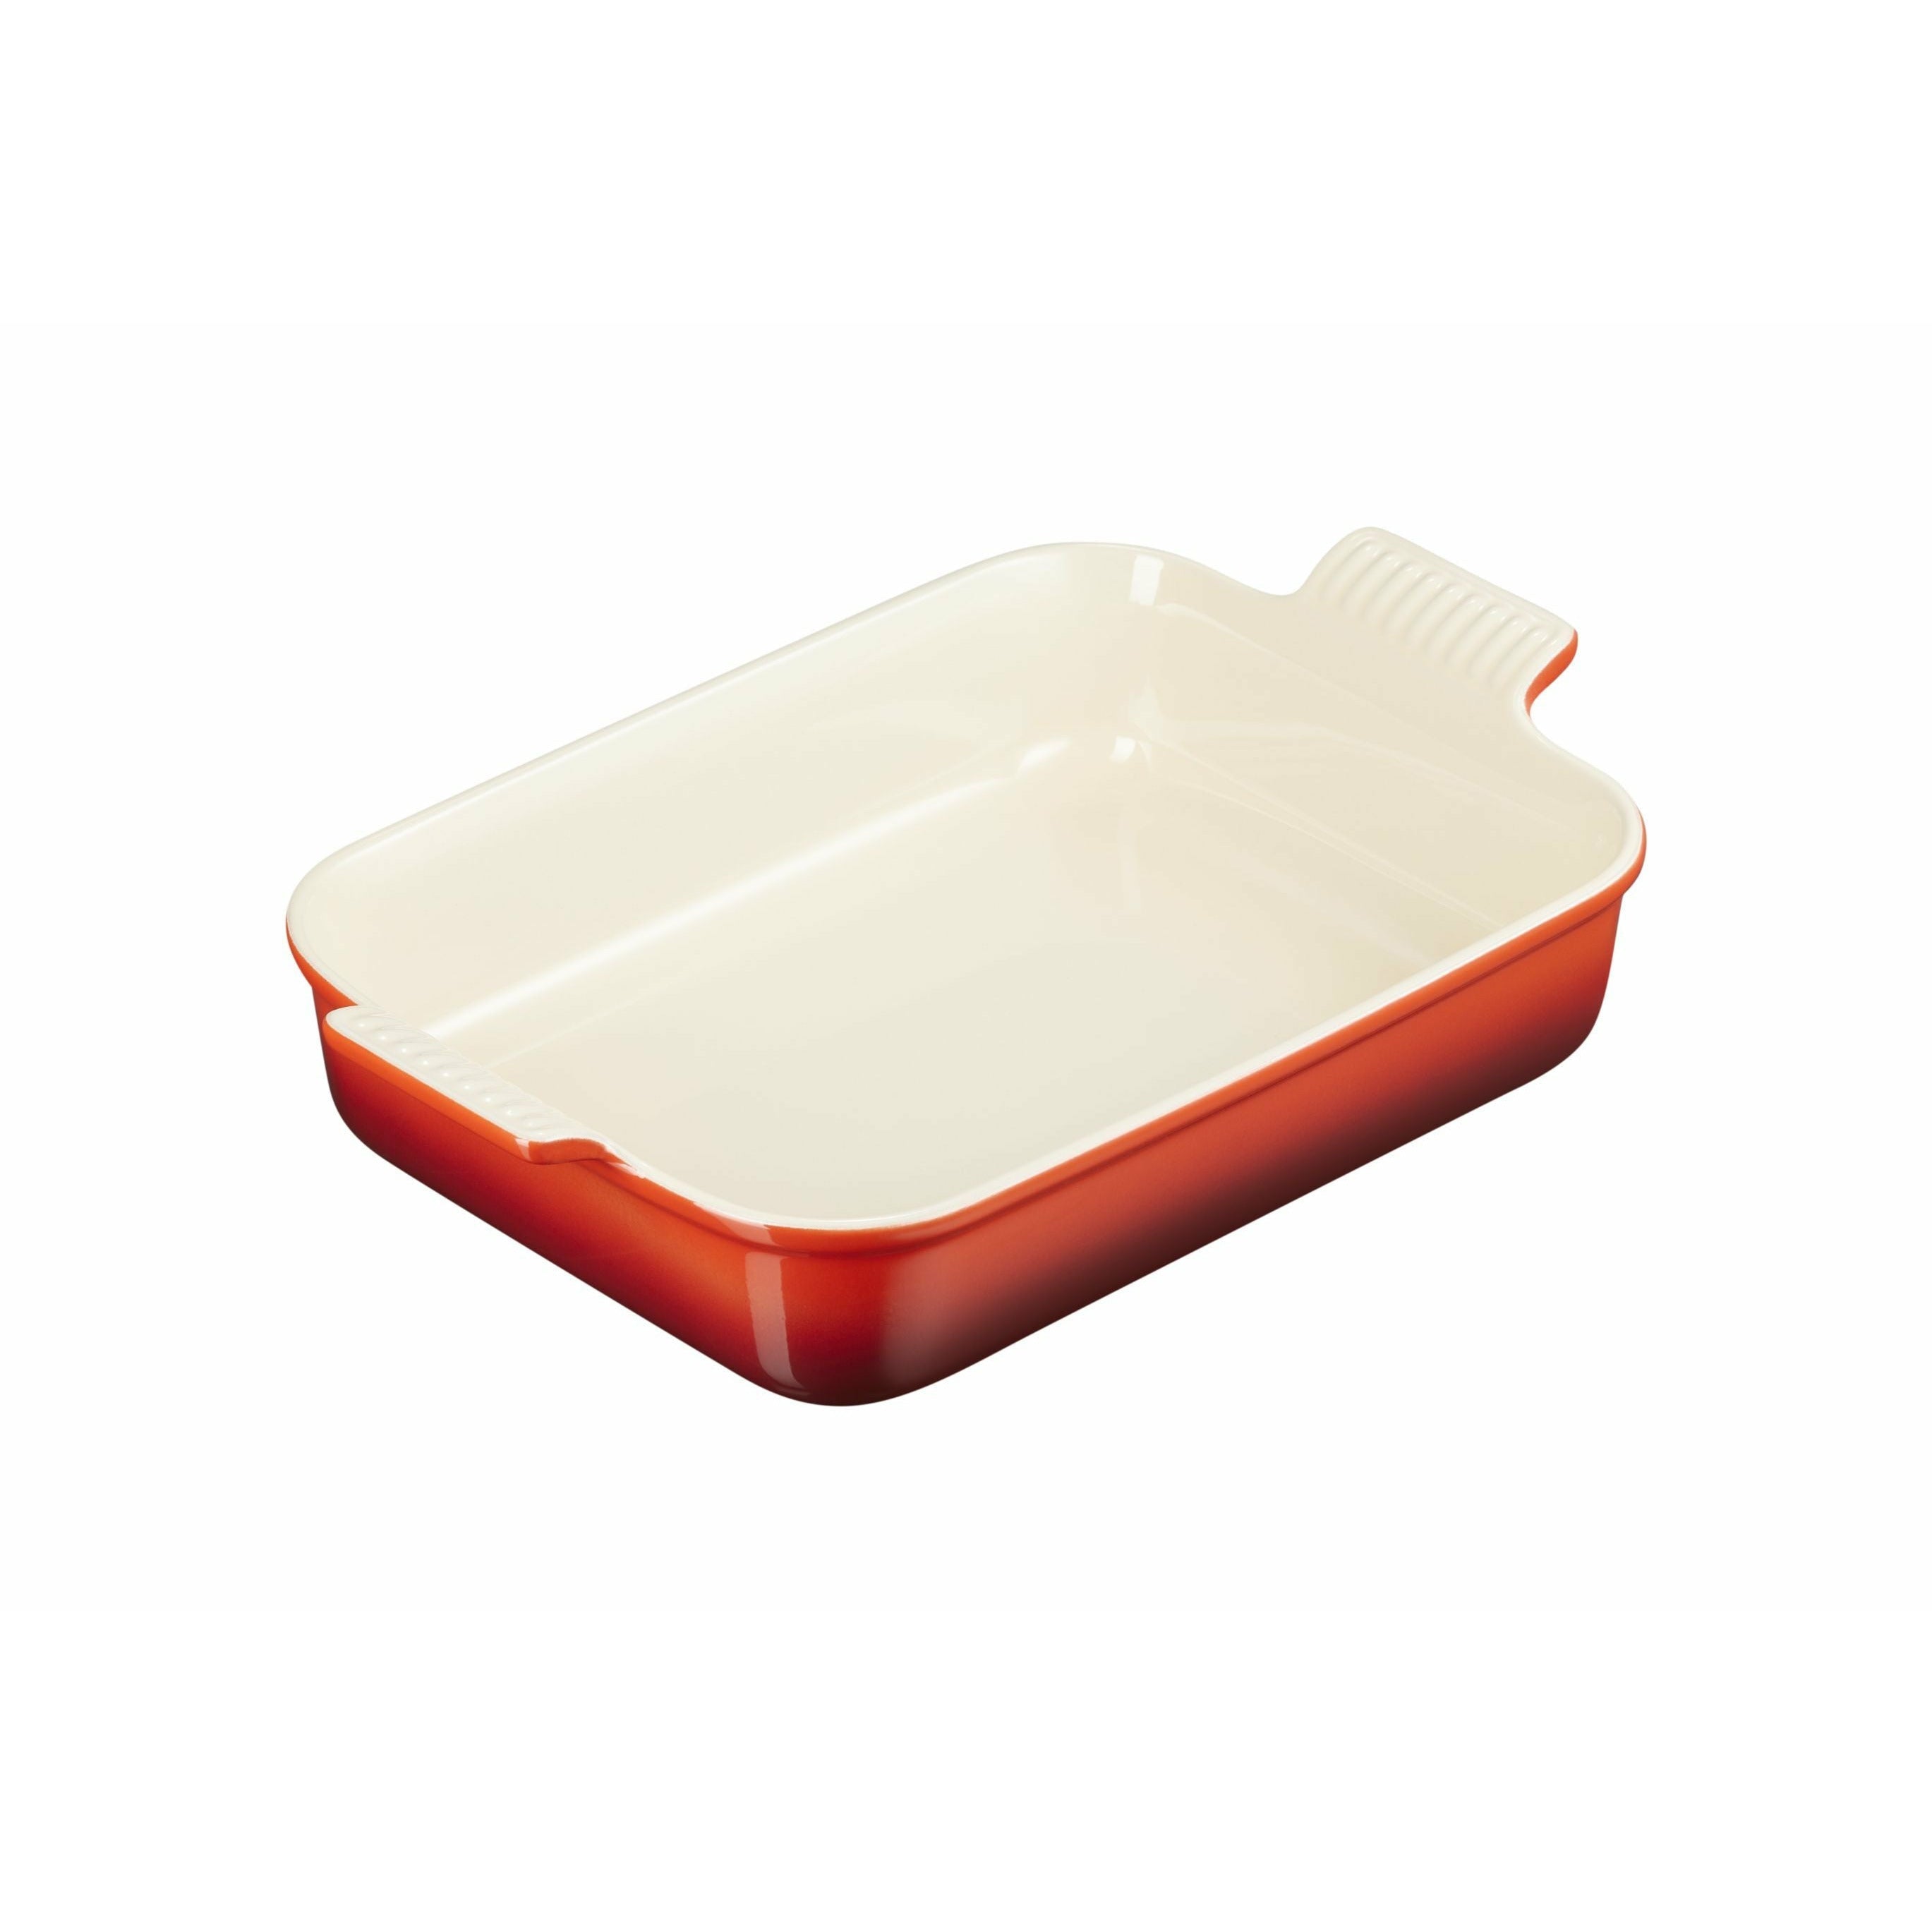 Le Creuset Rectangular Baking Dish Tradition 32 Cm, Cherry Red